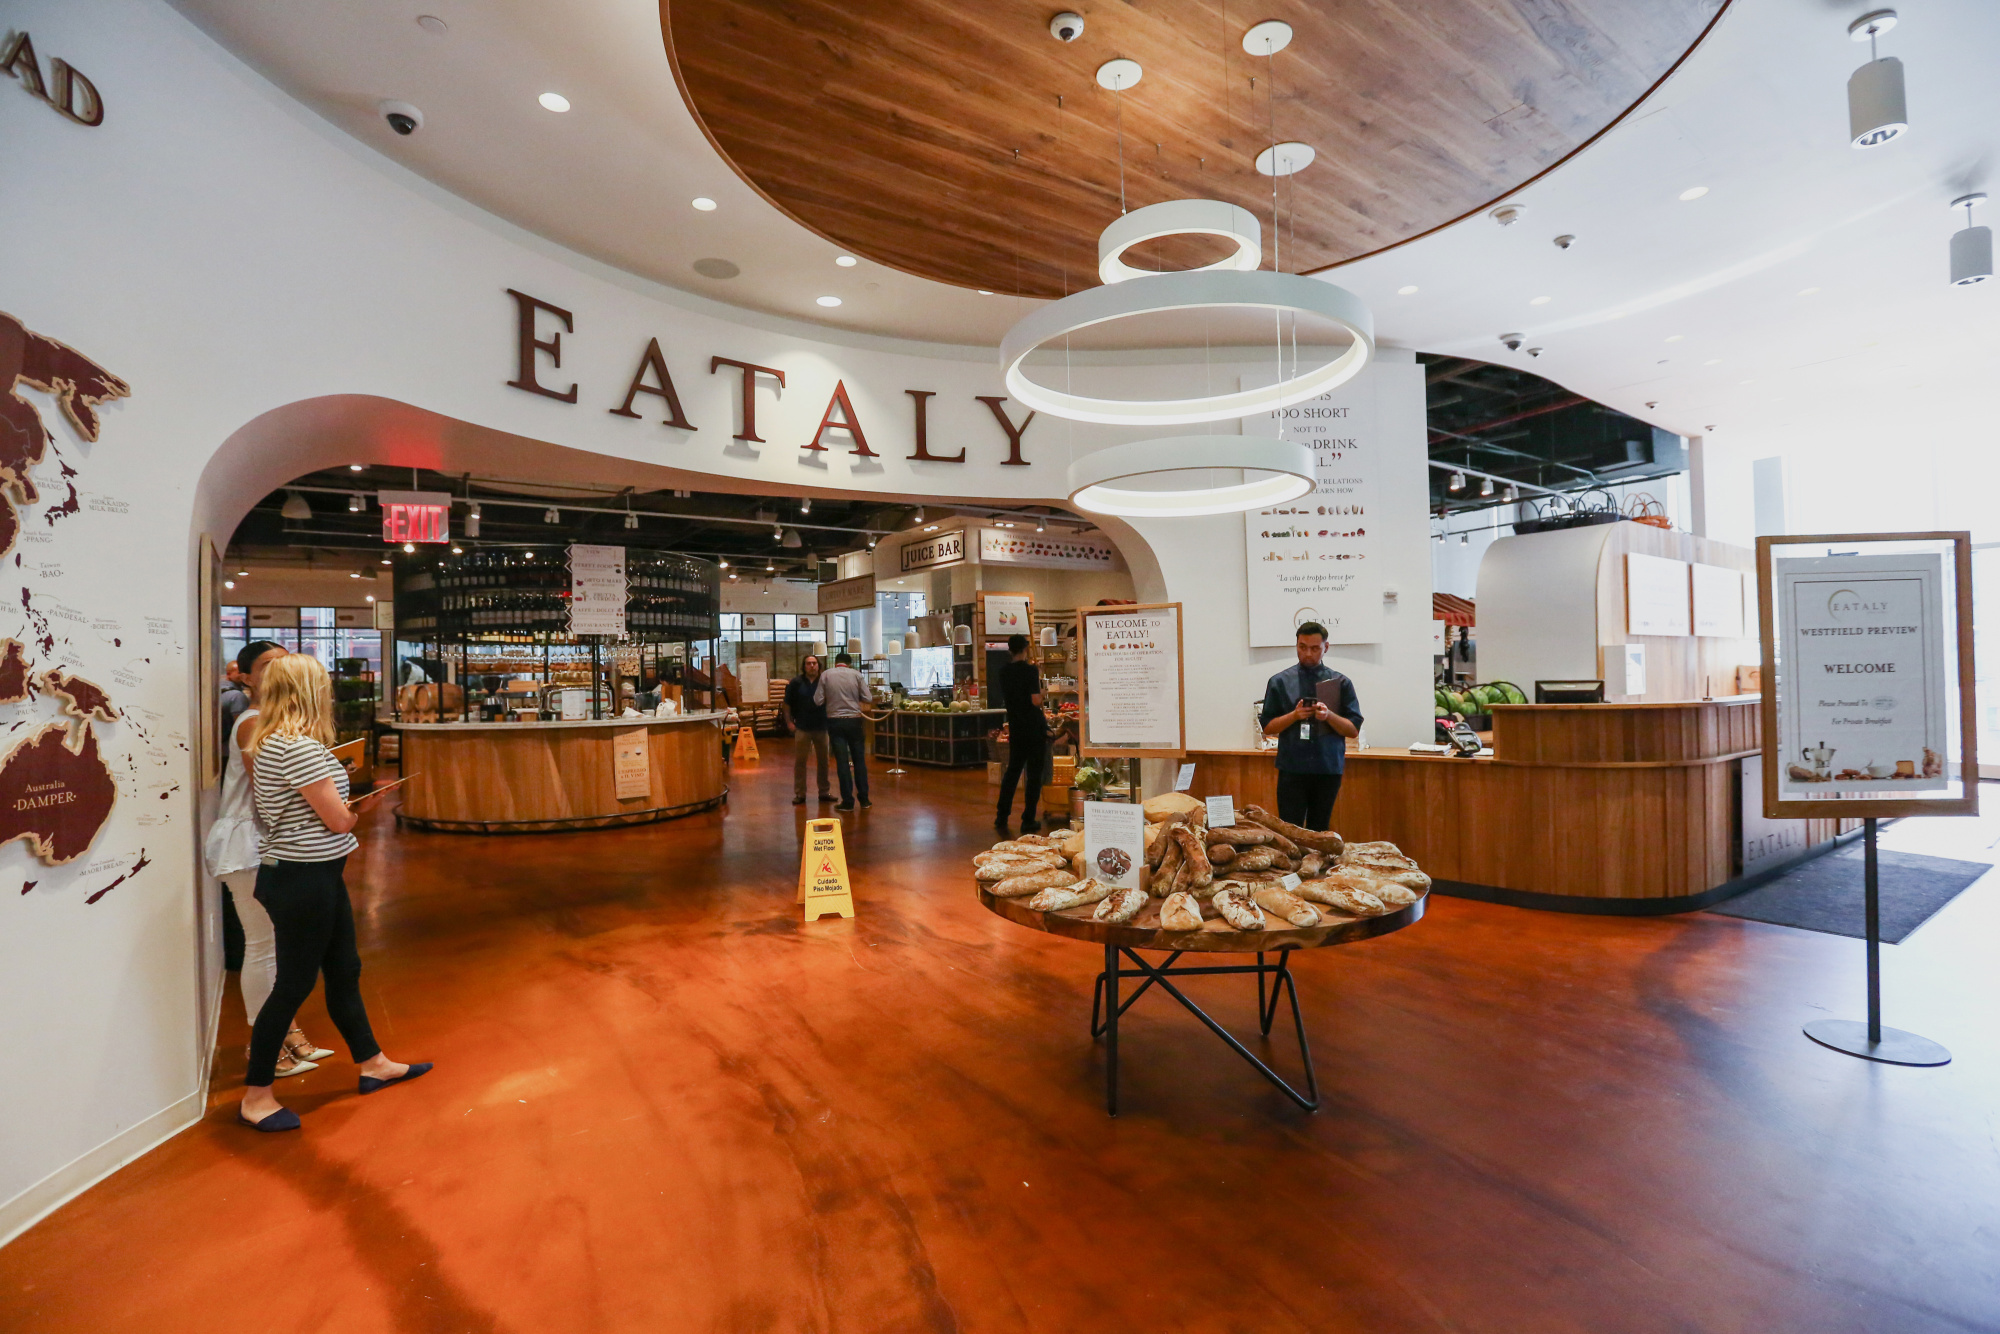 The high-end food chain Eataly, seen here inside the Westfield mall in New York’s&nbsp;World Trade Center complex, is one of many grocery chains that may help American malls&nbsp;survive.